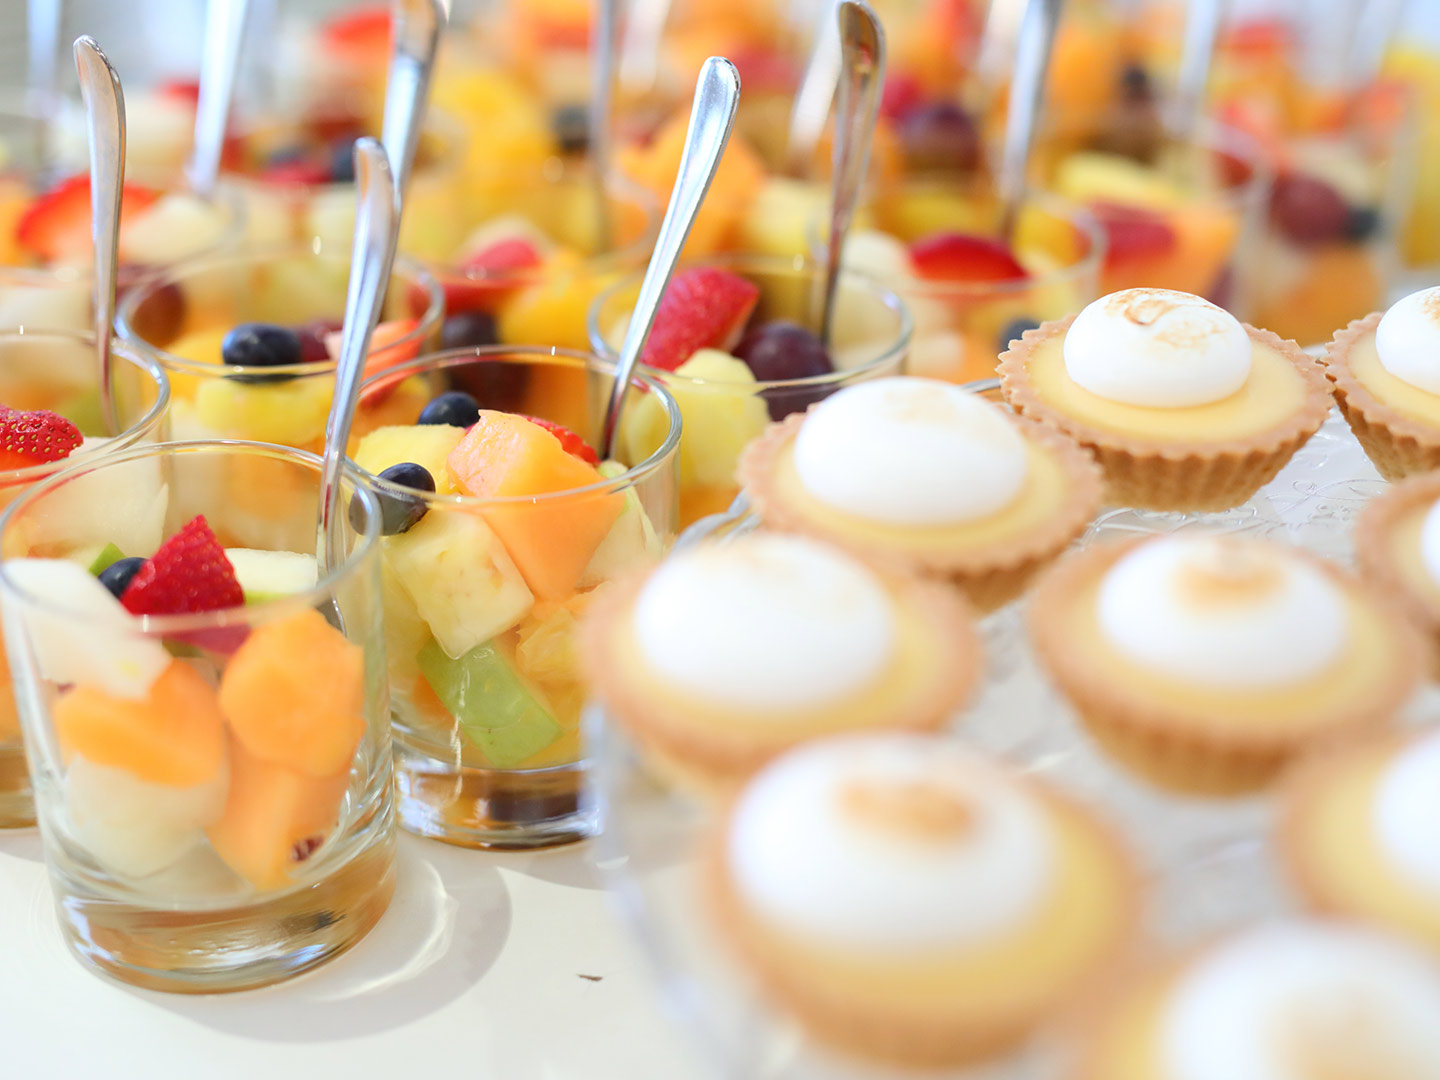 Photo: Event concepts seminar catering fruit and sweet treats